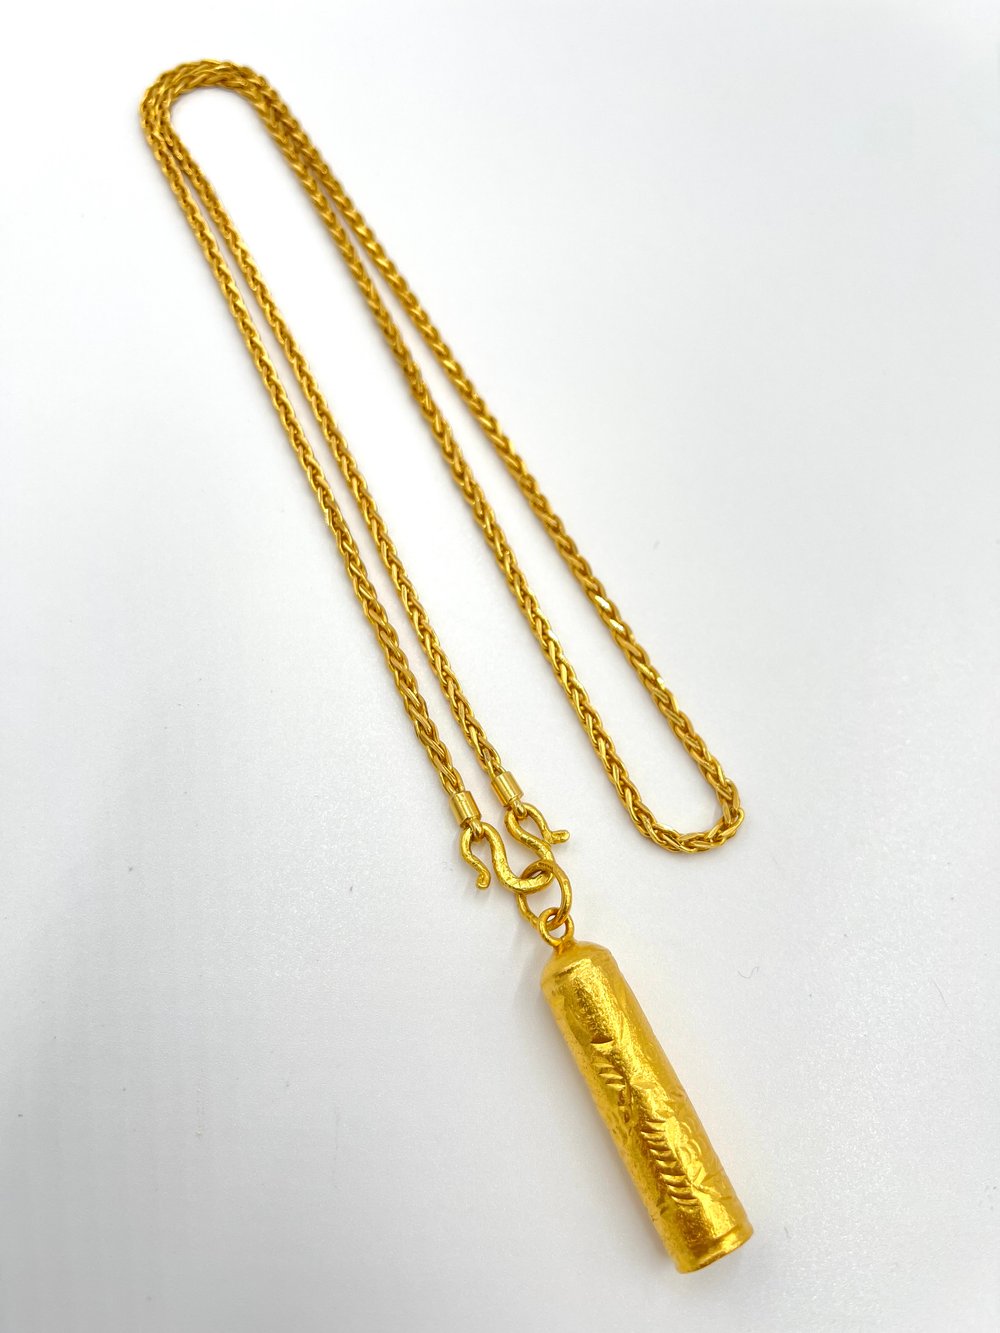 24k 26” Chain WITHOUT Pendant (Chain Only)